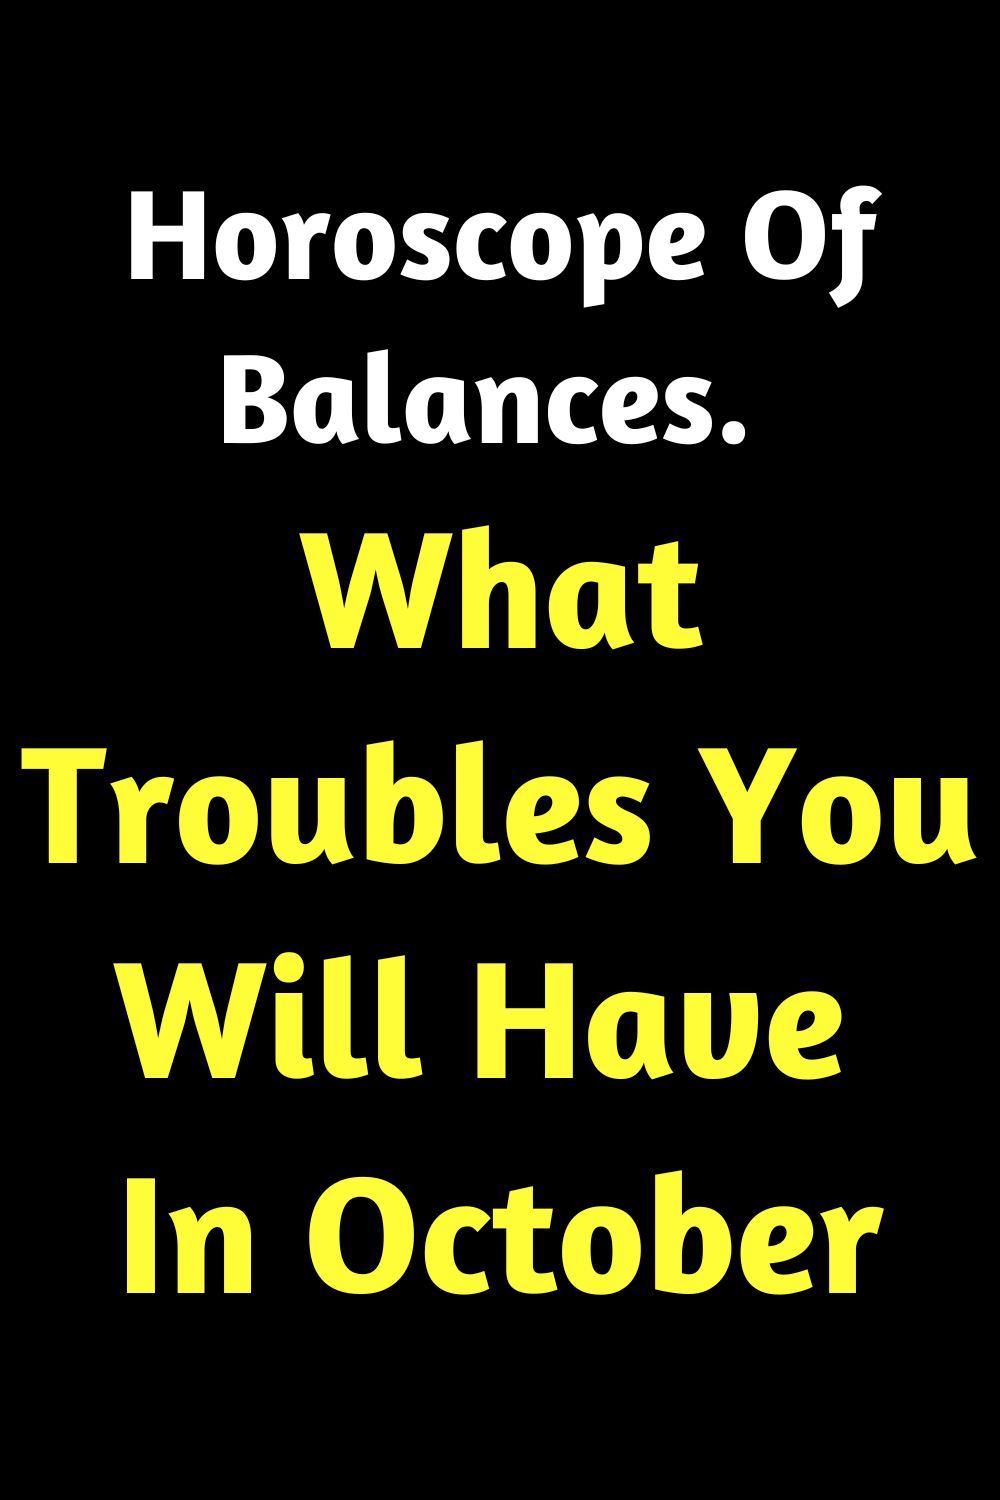 Horoscope Of Balances. What Troubles You Will Have In October